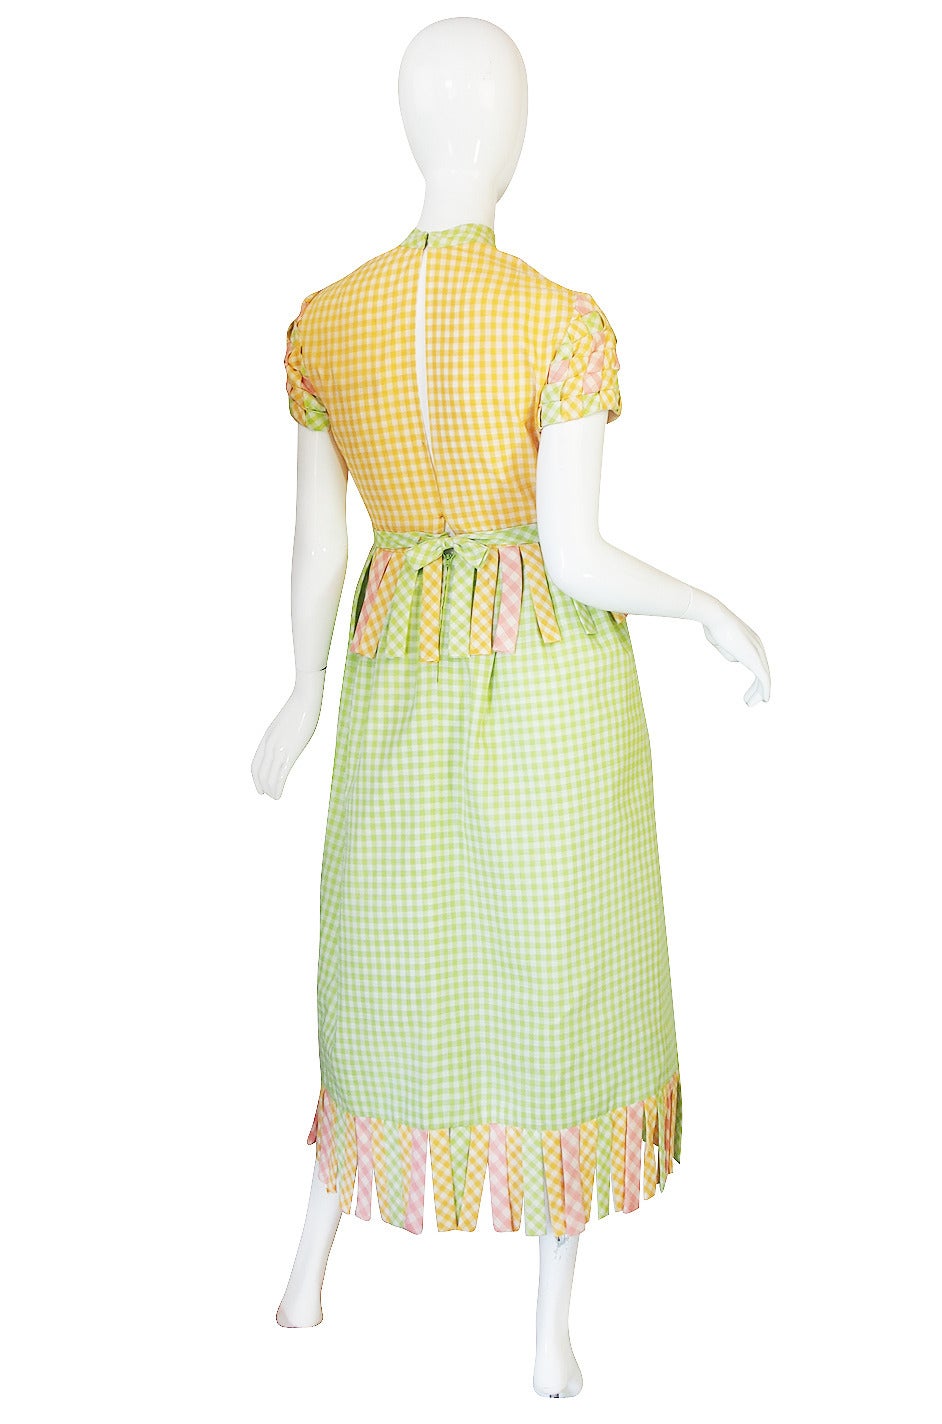 The work on this dress is amazing. Made of a cotton printed in three colors of gingham - yellow, green and pink - it feels shockingly modern and works in perfectly with a modern wardrobe as it has a very cutting edge feel despite its use of such a